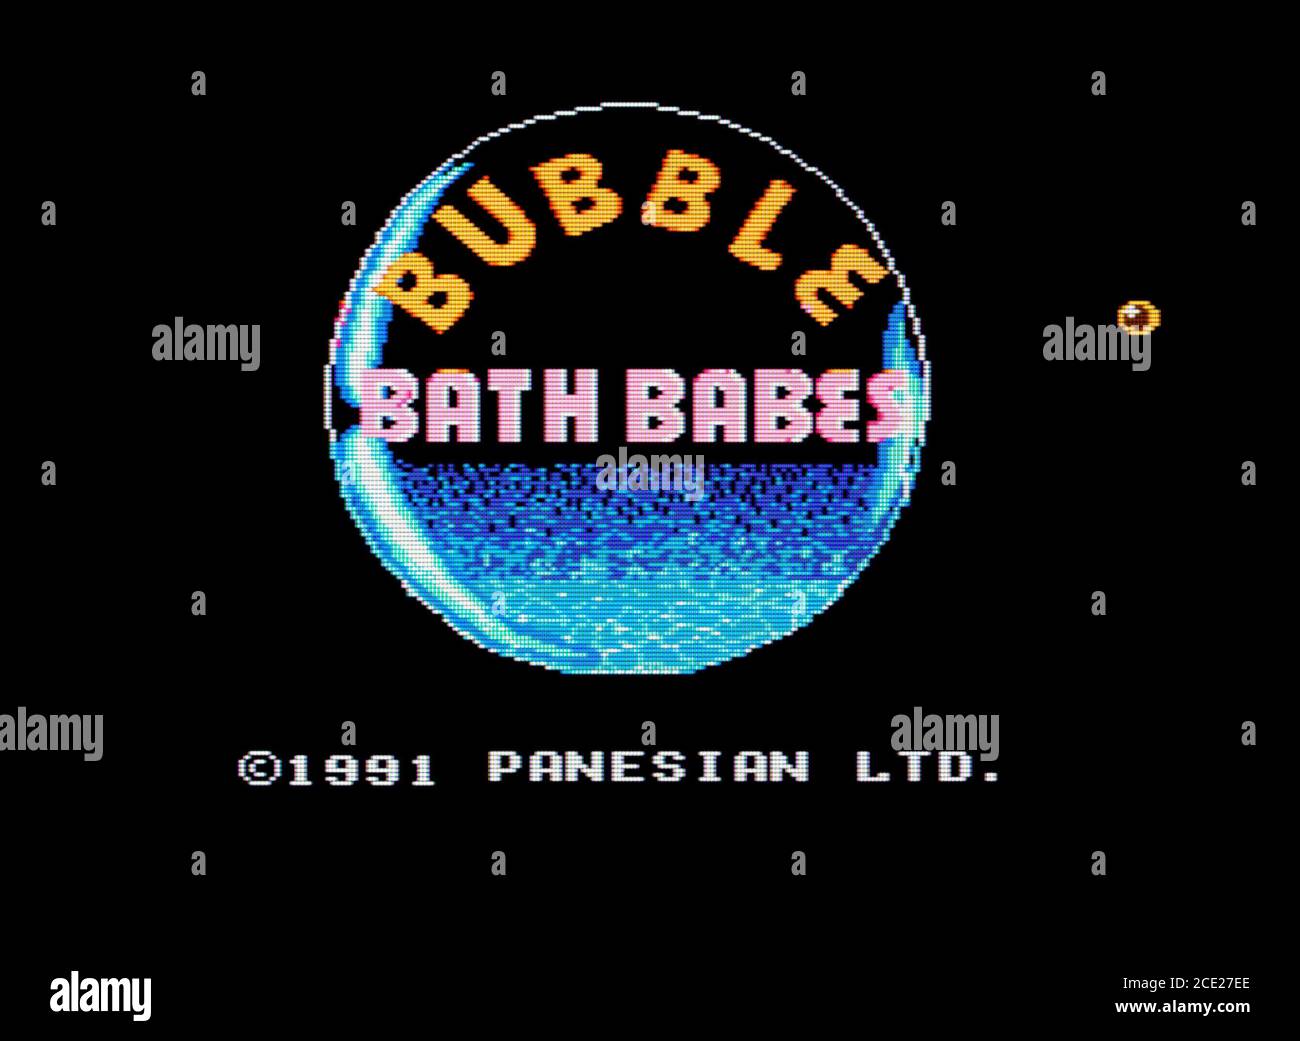 Bubble Bath Babes - Nintendo Entertainment System - NES Videogame - Editorial use only Stock Photo